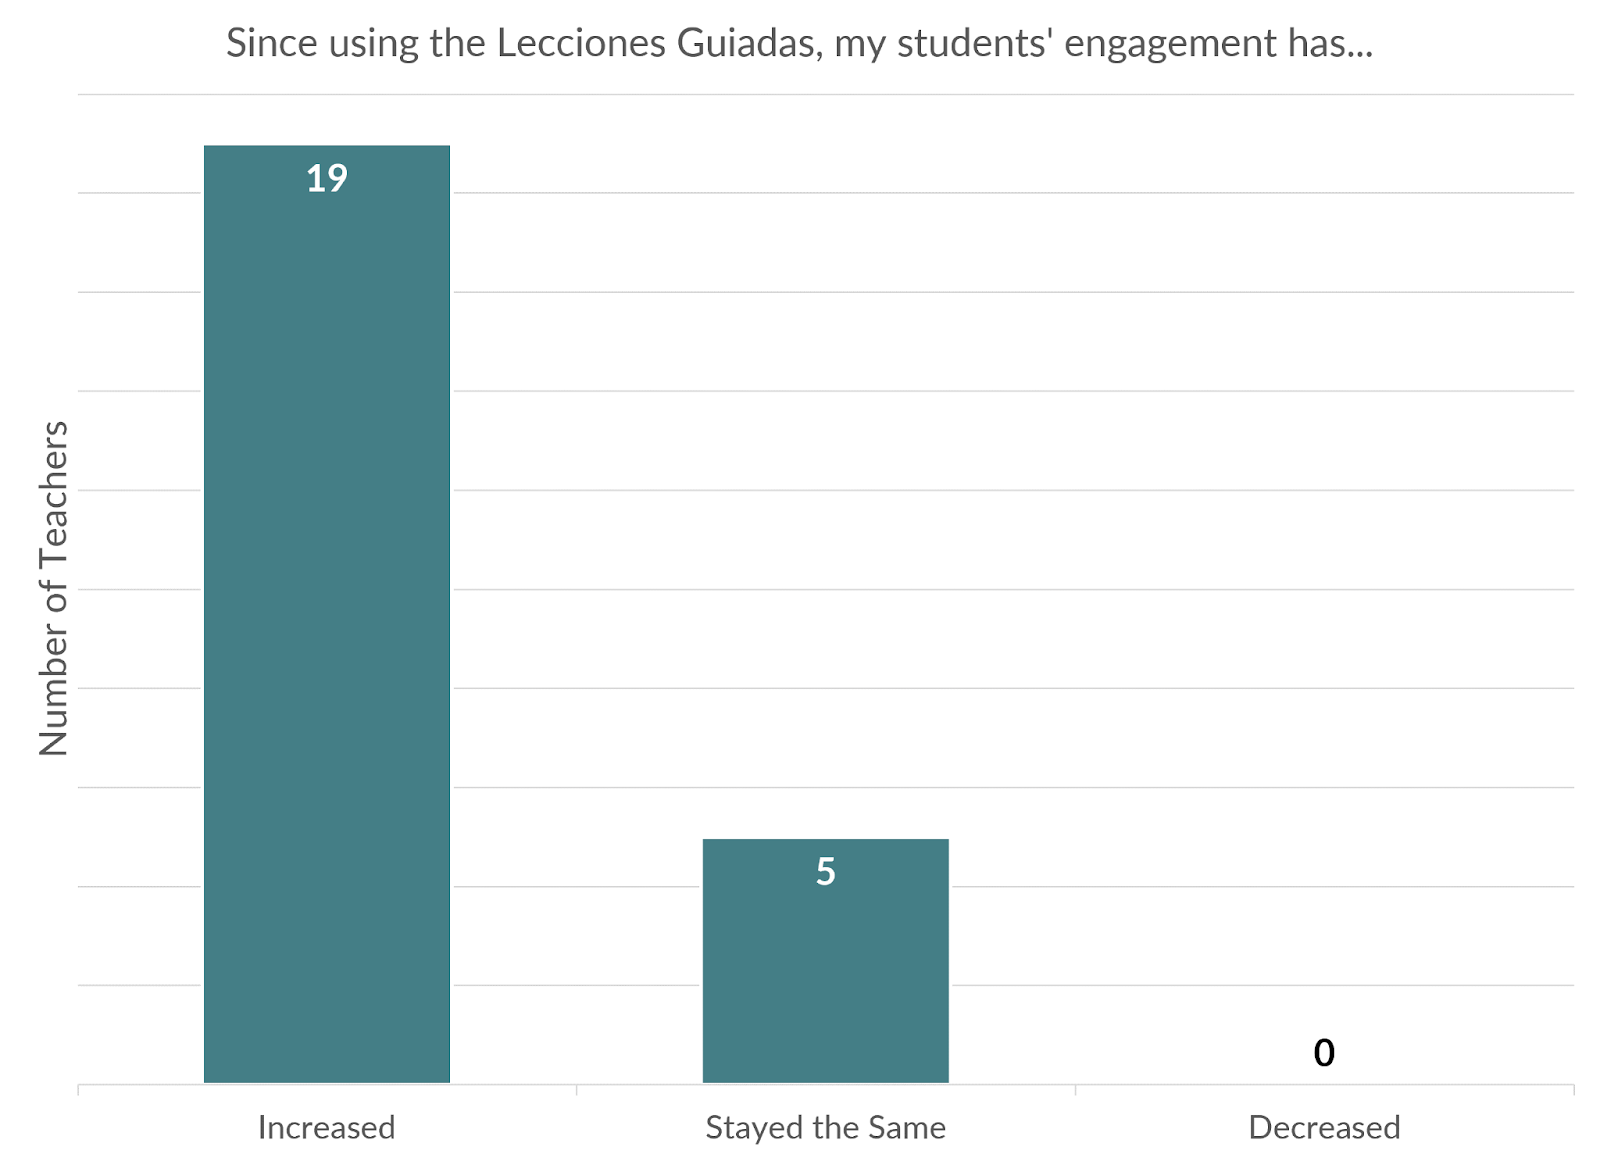 In the treatment group, 79% of teachers reported an observable increase in student engagement. 